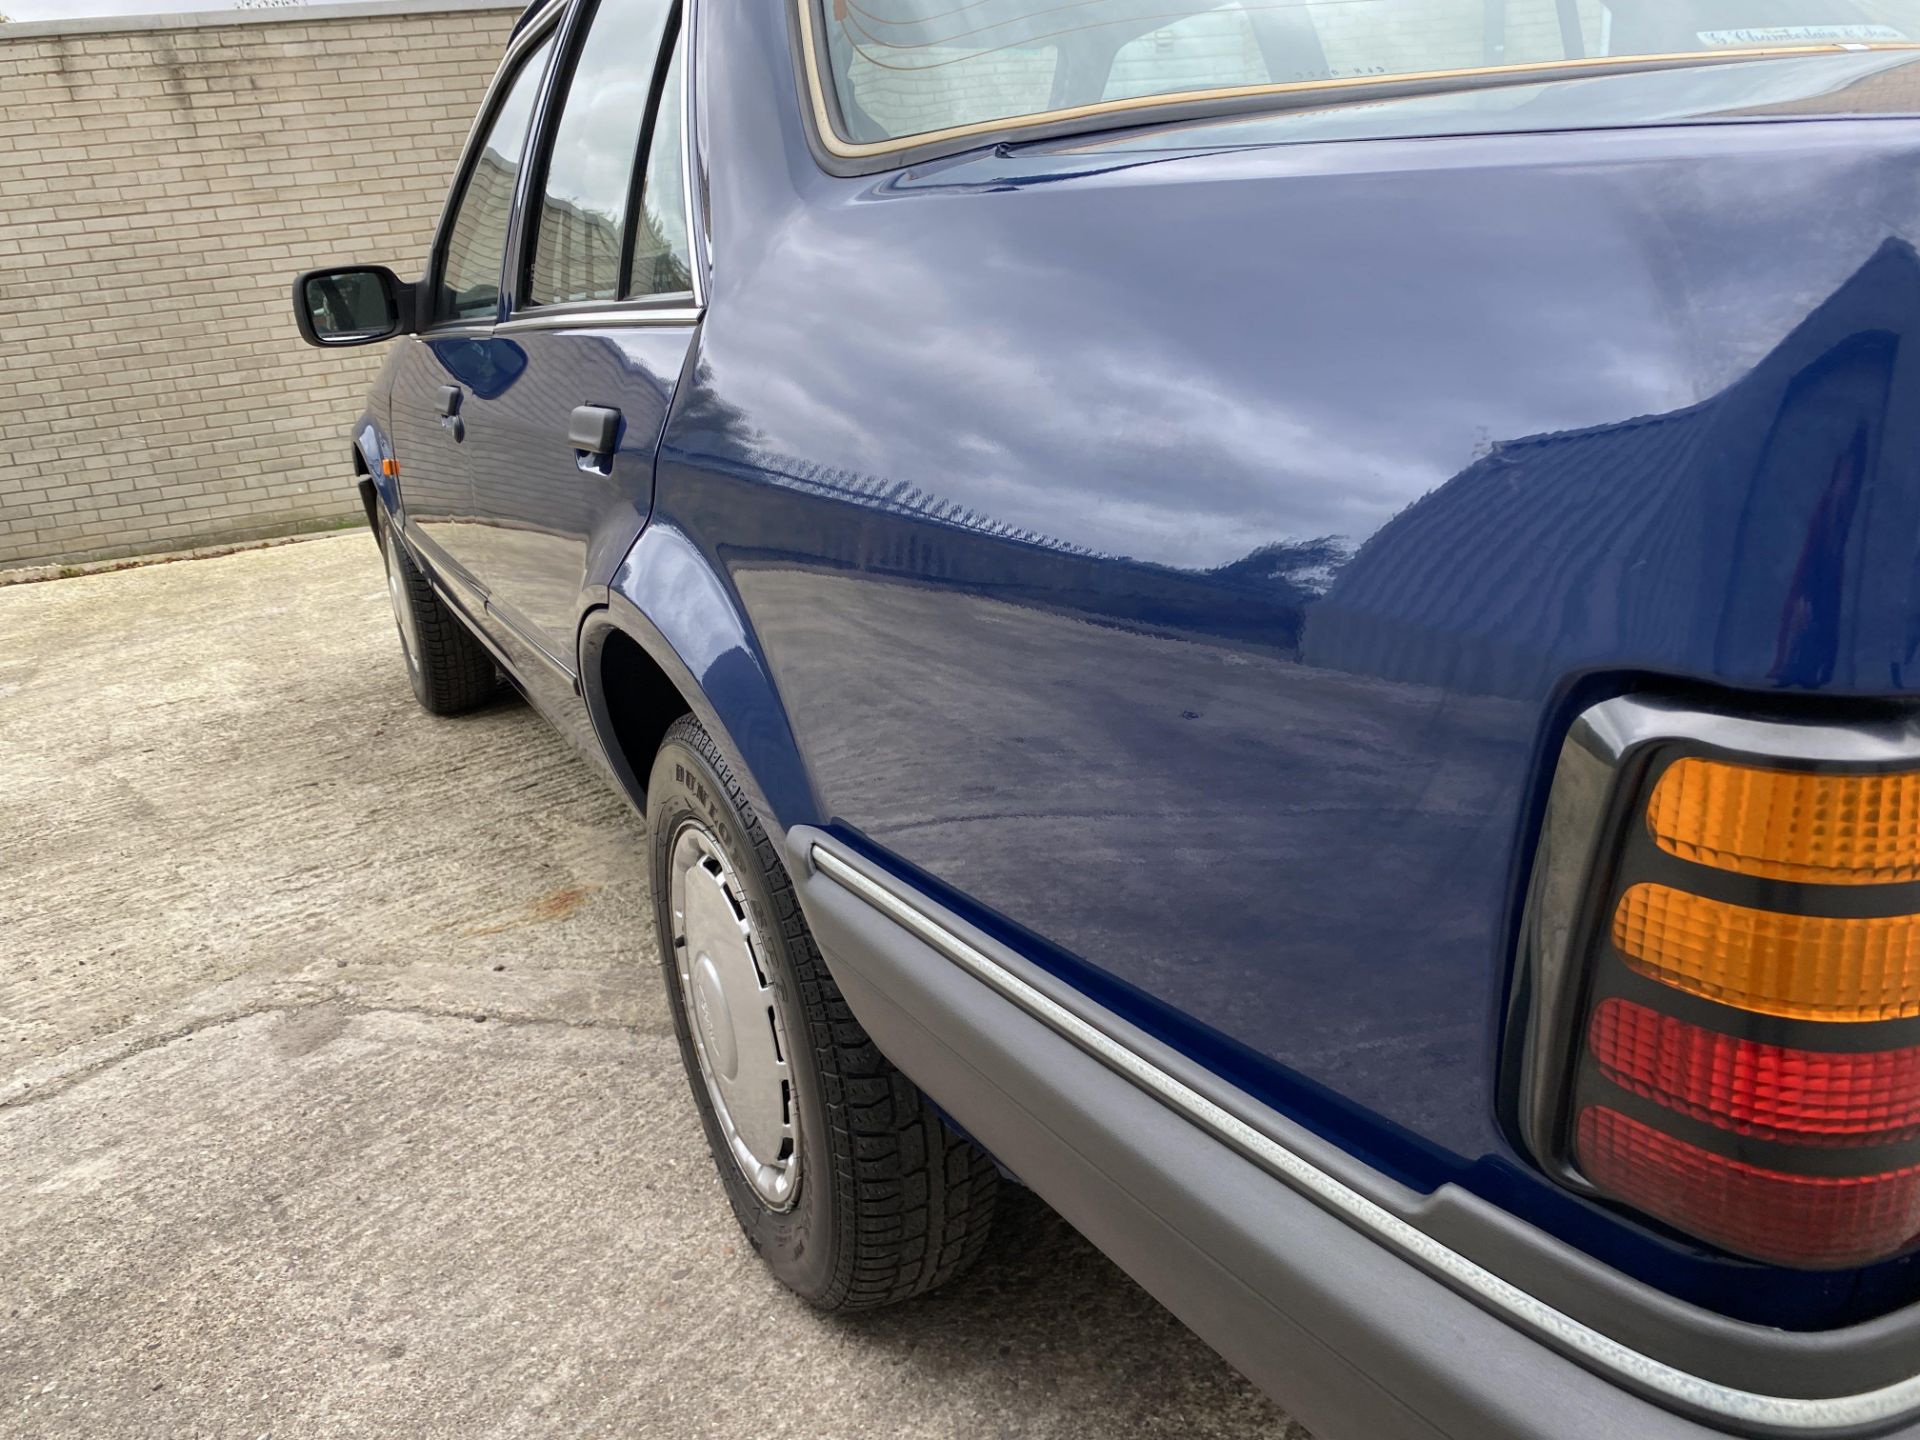 Ford Orion 1.6 GL - Image 16 of 42